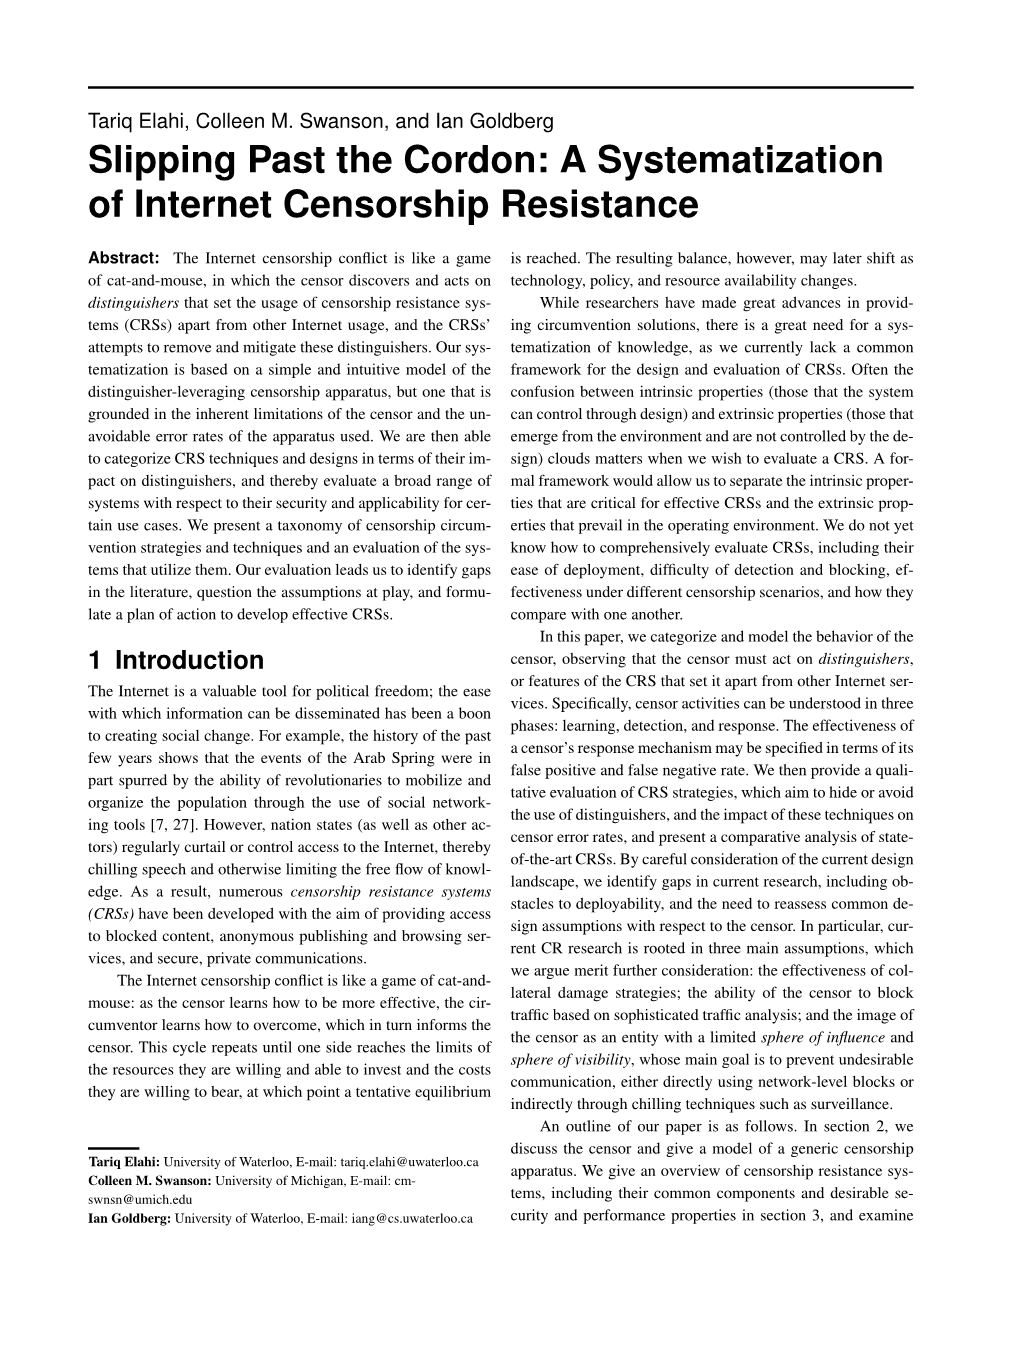 A Systematization of Internet Censorship Resistance